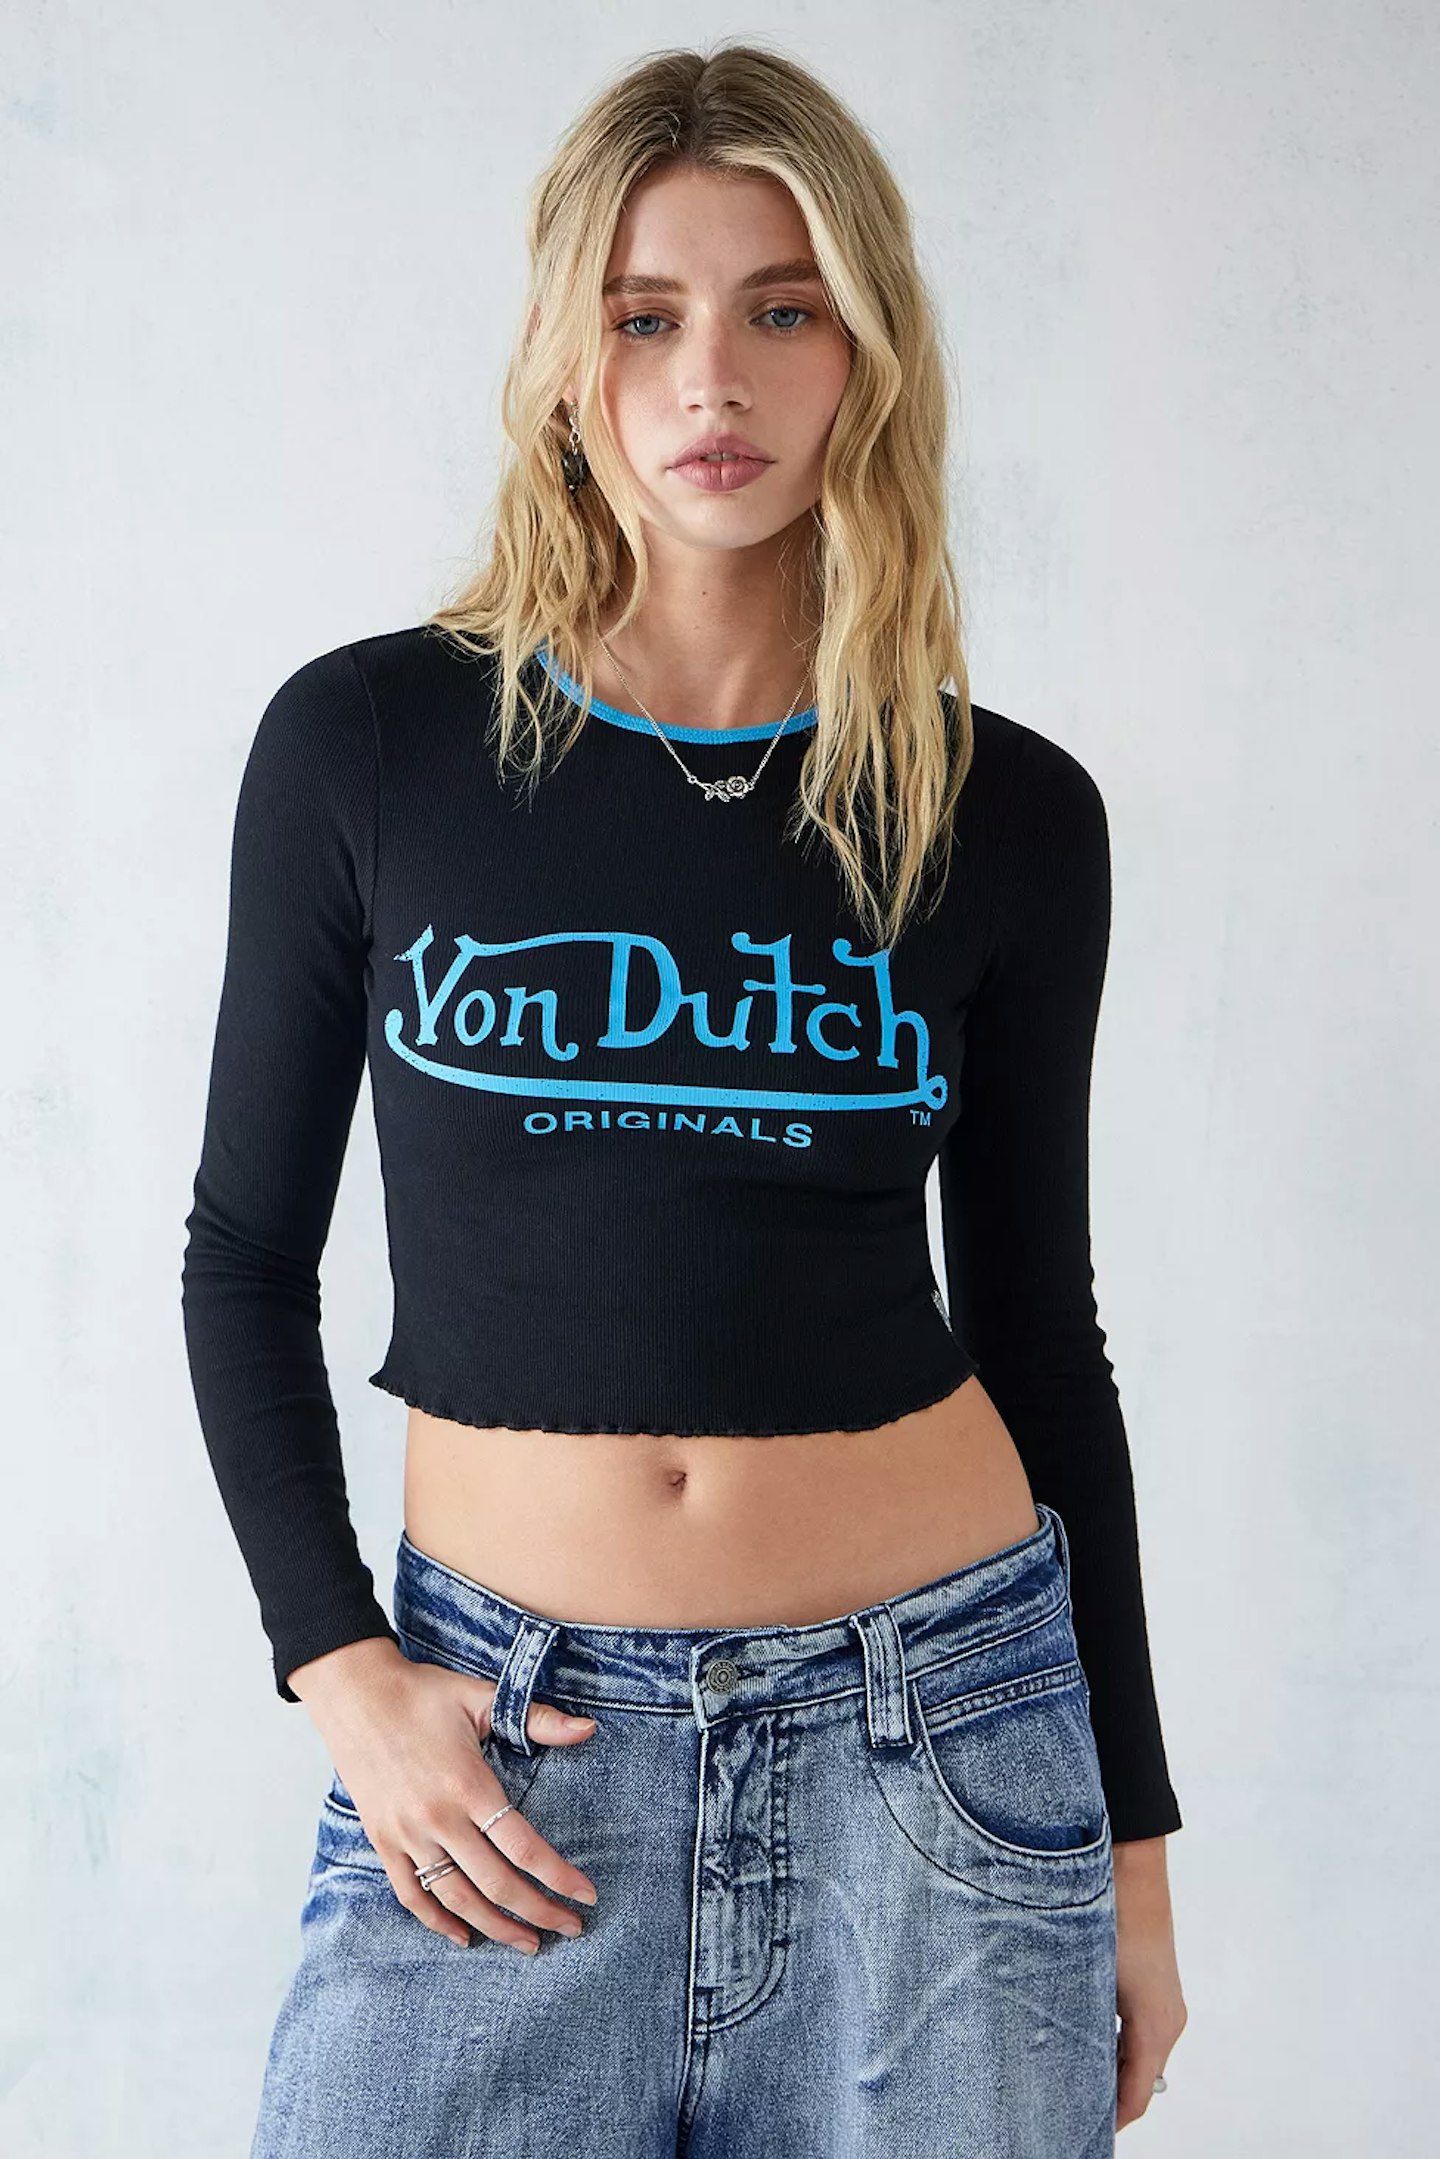 Von Dutch, UO Exclusive Black Long-Sleeved Cropped Baby T-Shirt